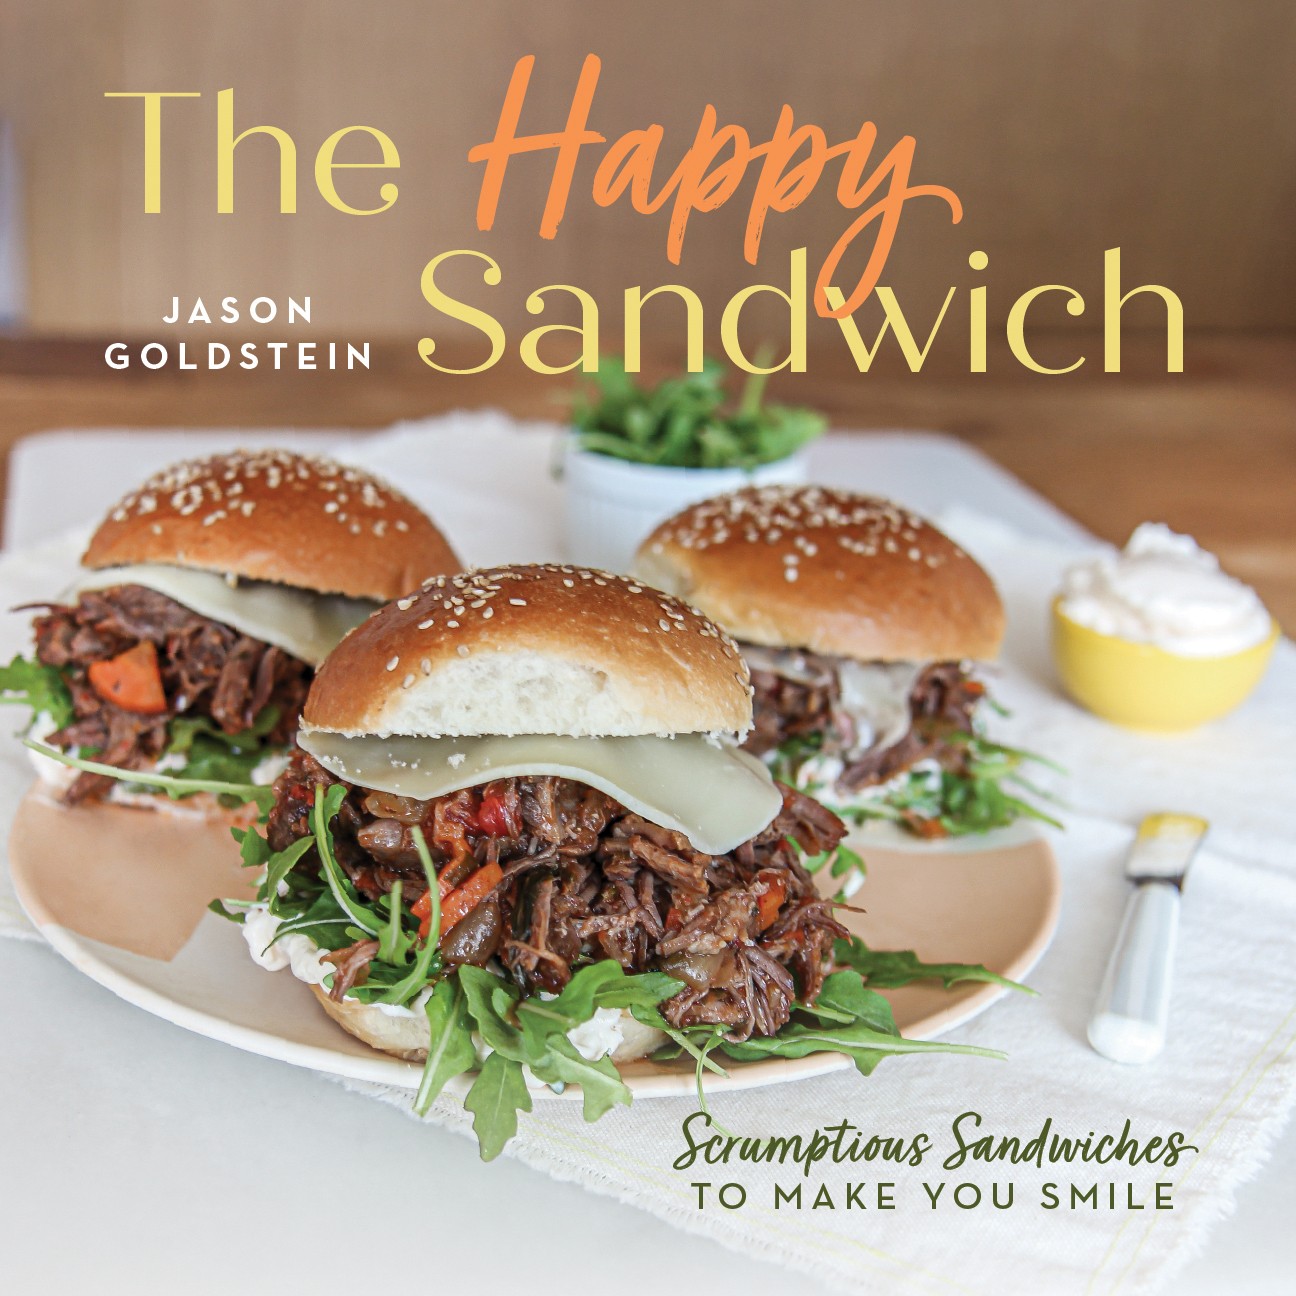 The Happy Sandwich Cookbook! Easy recipe for busy people! Sandwich recipes made in a slow cooker, sheet pan, no cook sandwiches, and no bread sandwiches. A fun cookbook! www.ChoppHappy.com